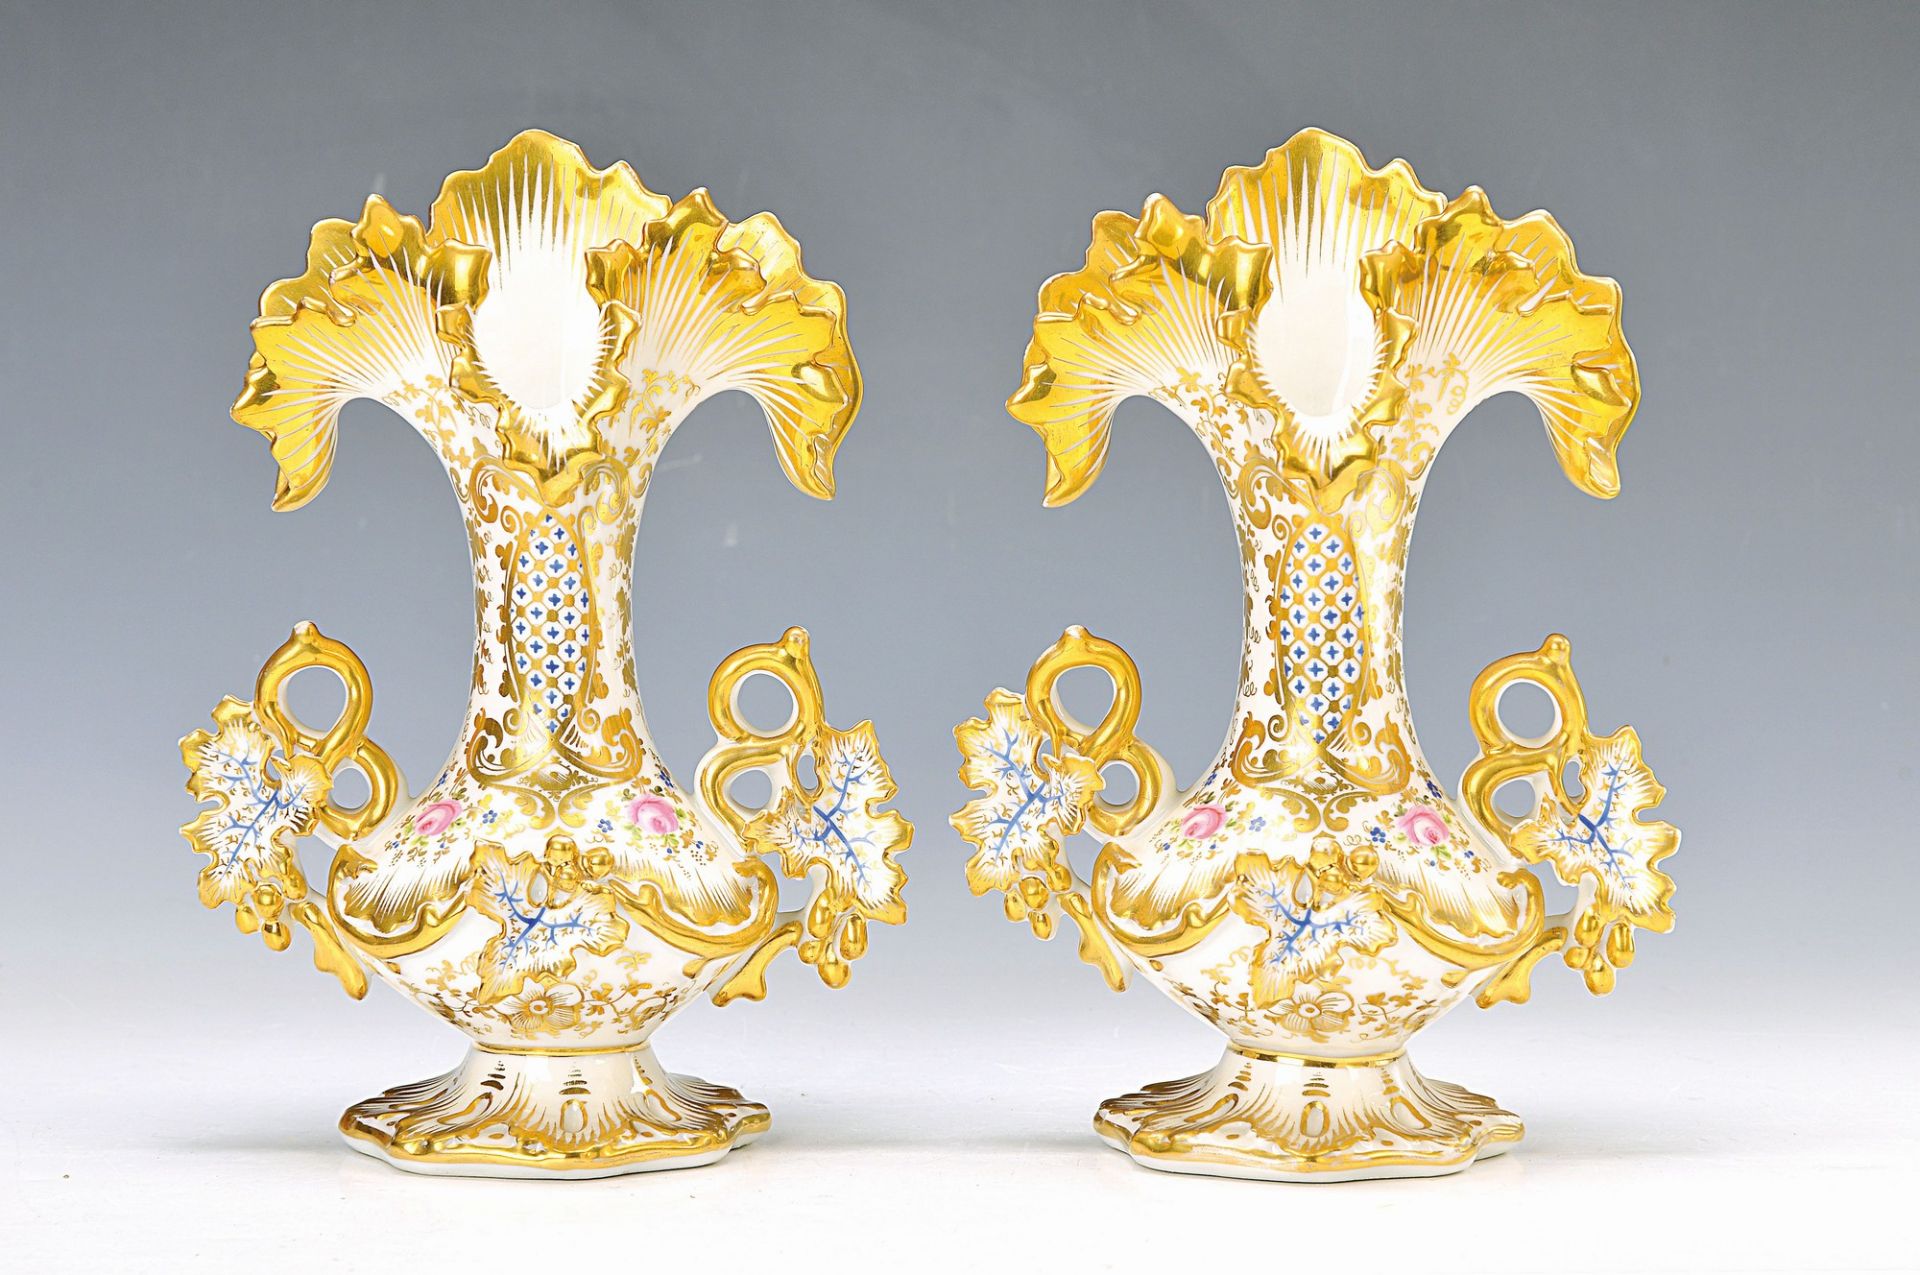 Pair of vases, France, around 1860, porcelain,with gold decoration, floral decor, H. 22.5 cmPaar